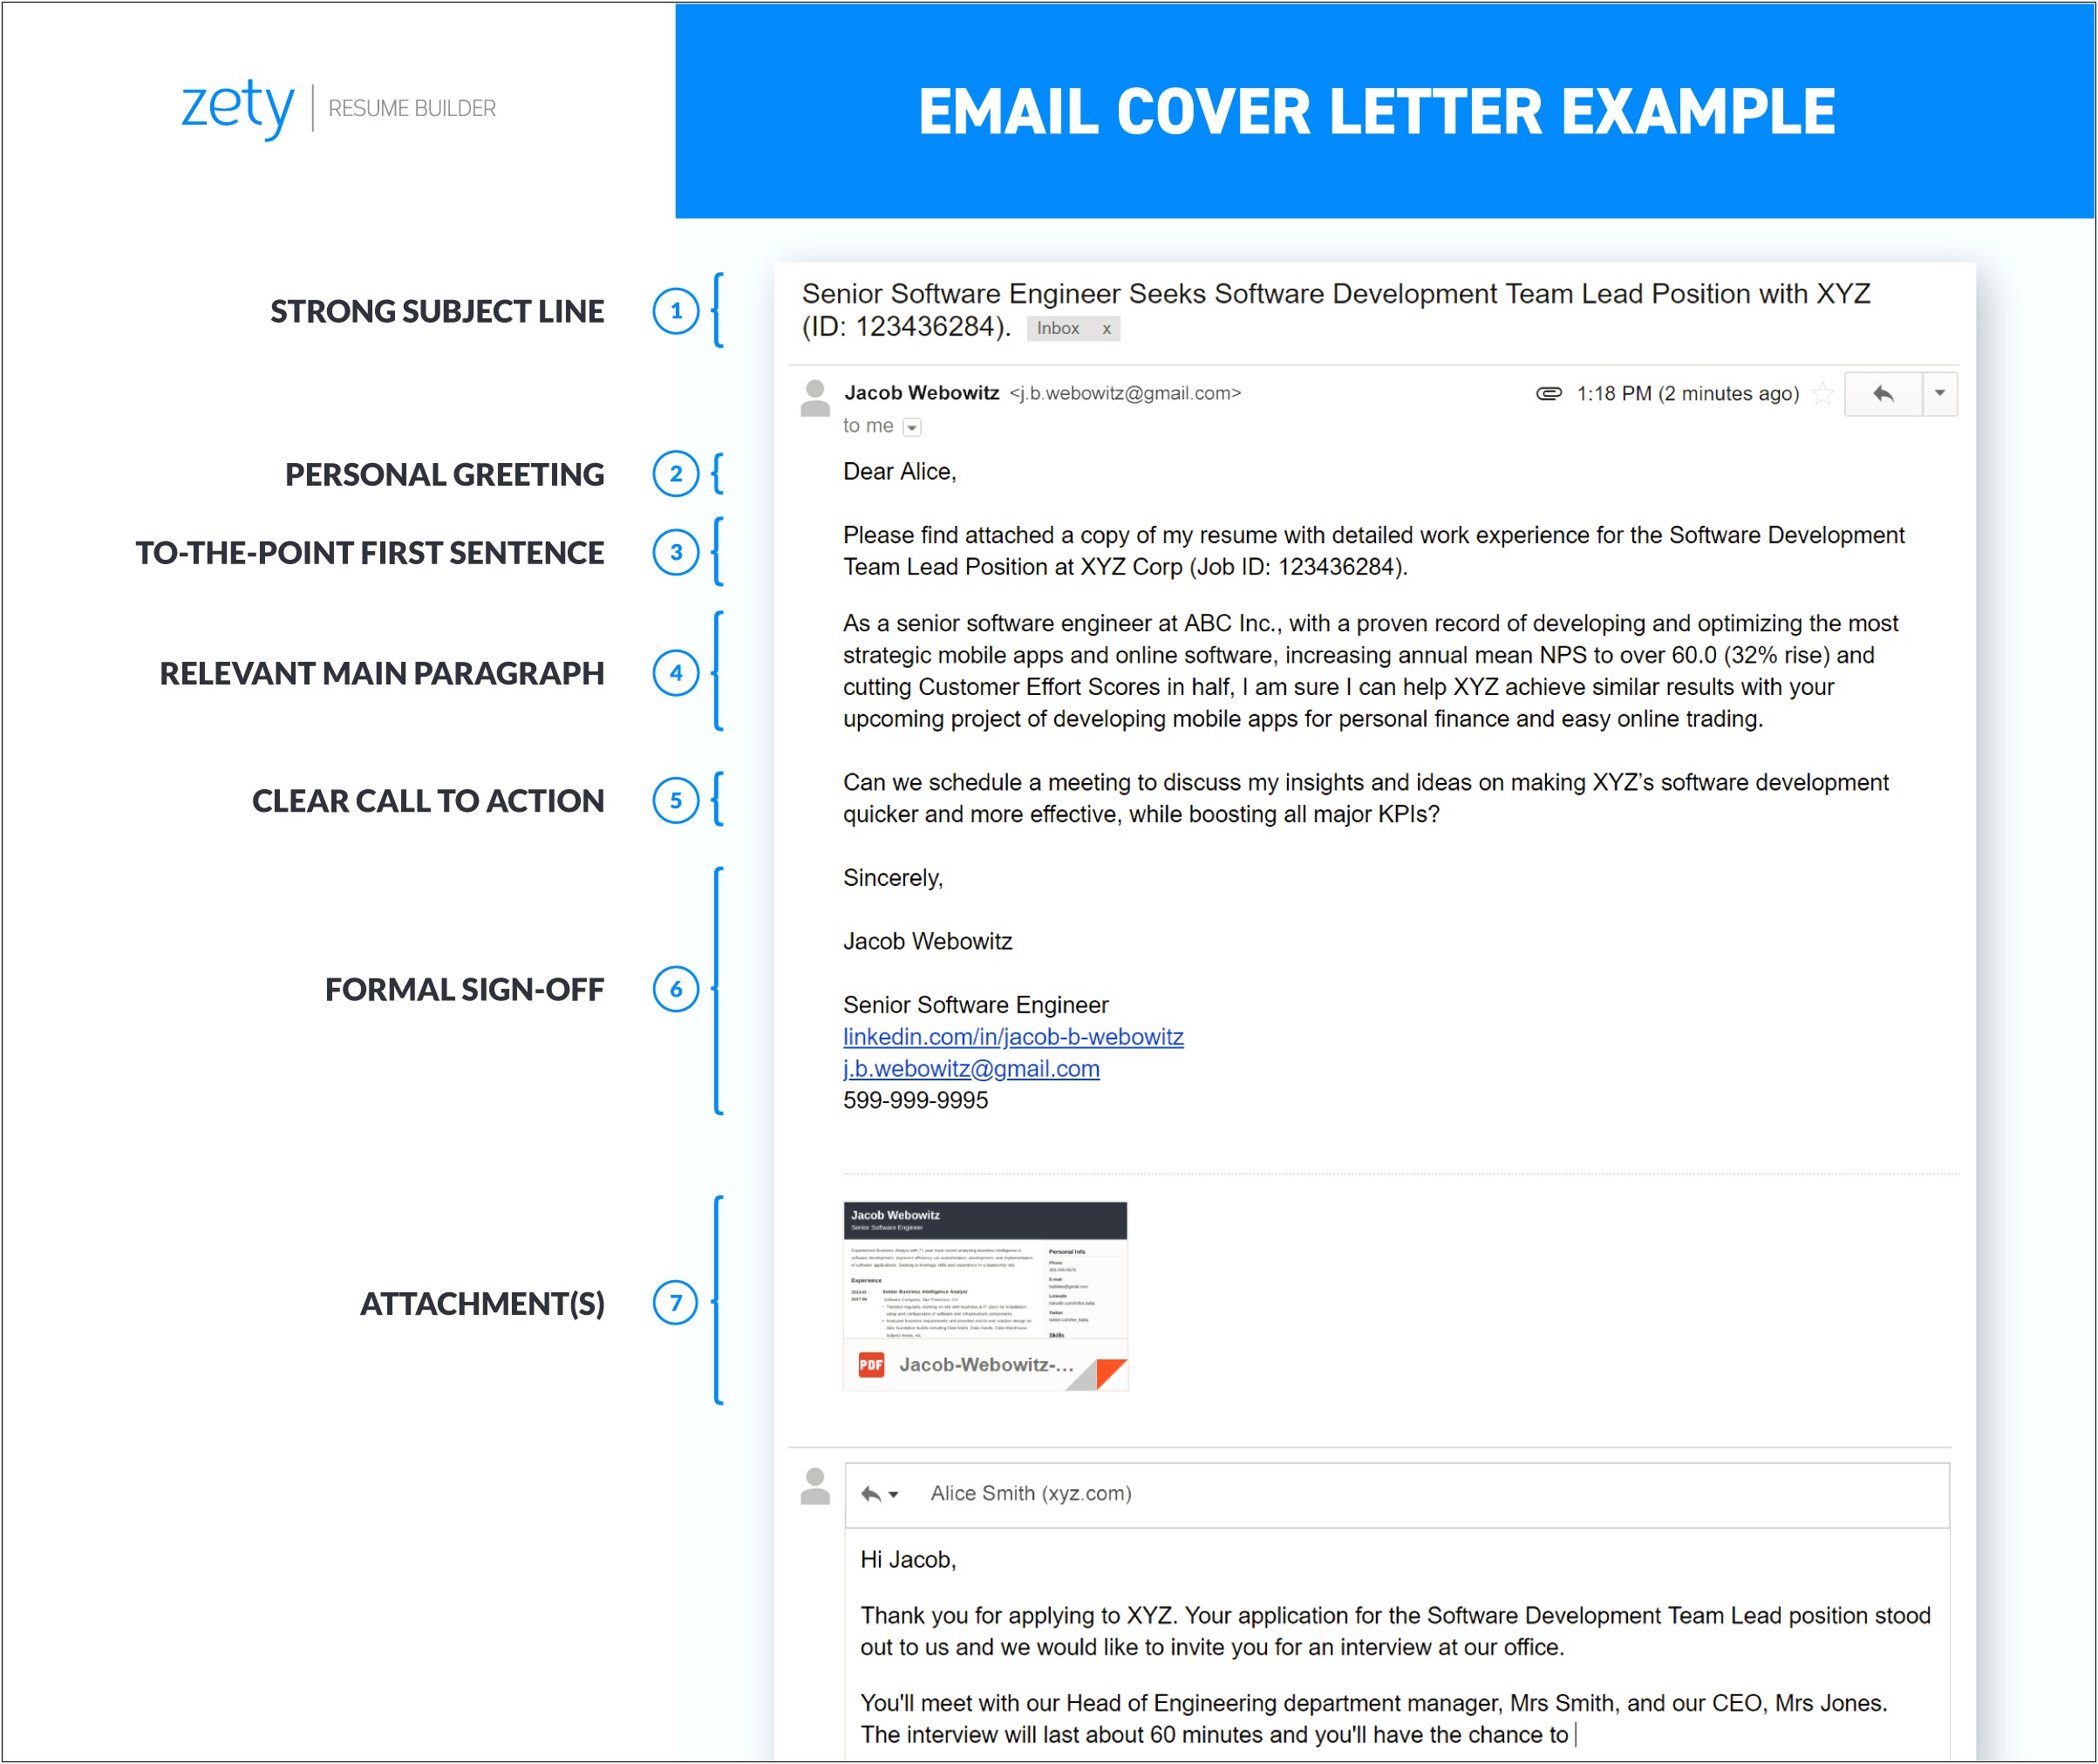 Email Format To Send Resume And Cover Letter